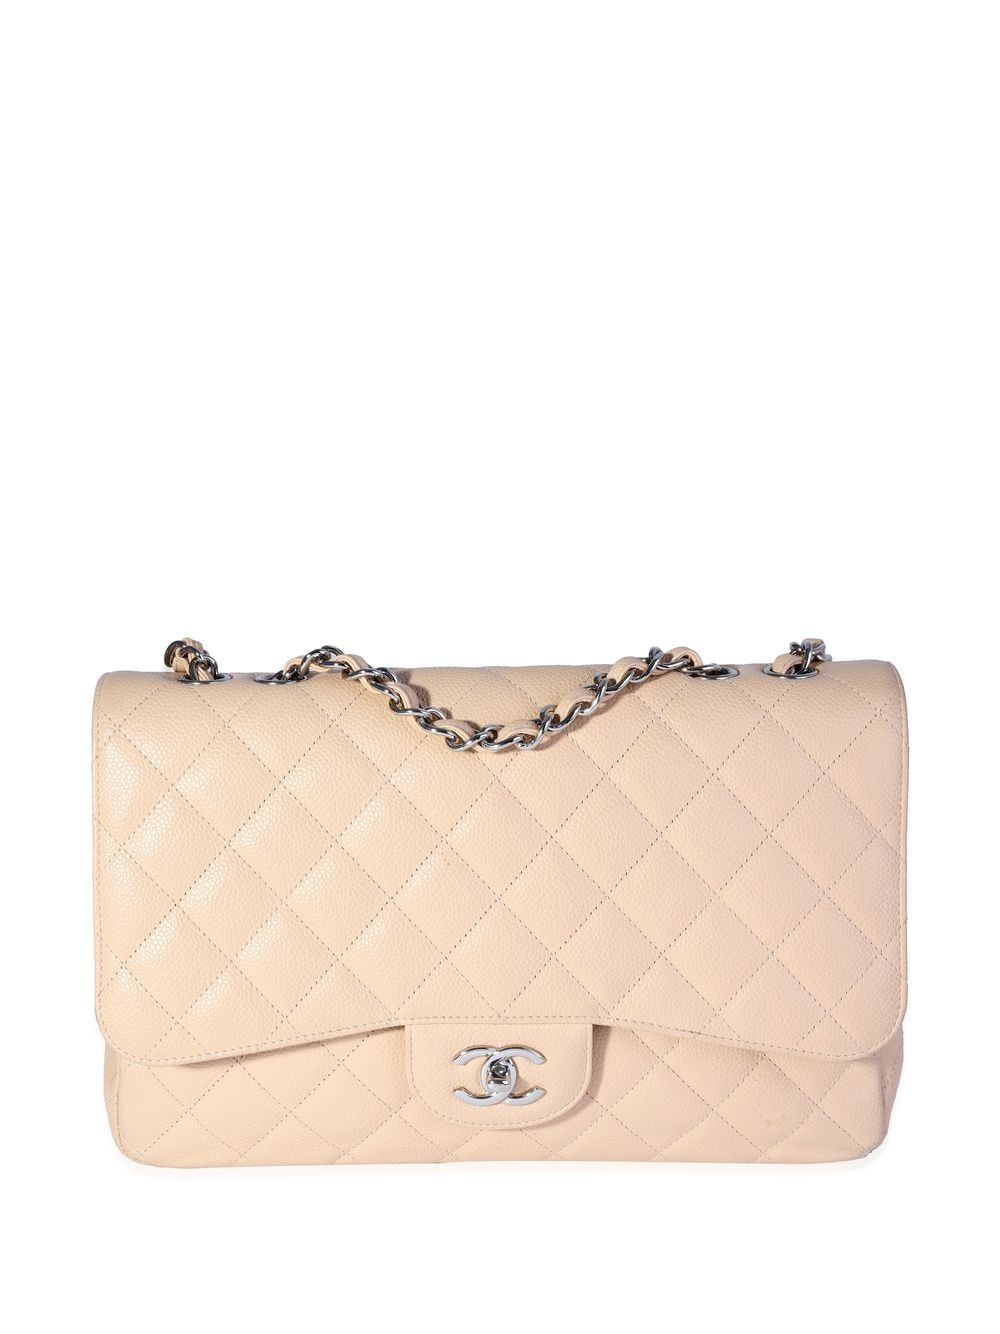 CHANEL Pre-Owned Jumbo Classic Flap Schultertasche - Nude von CHANEL Pre-Owned